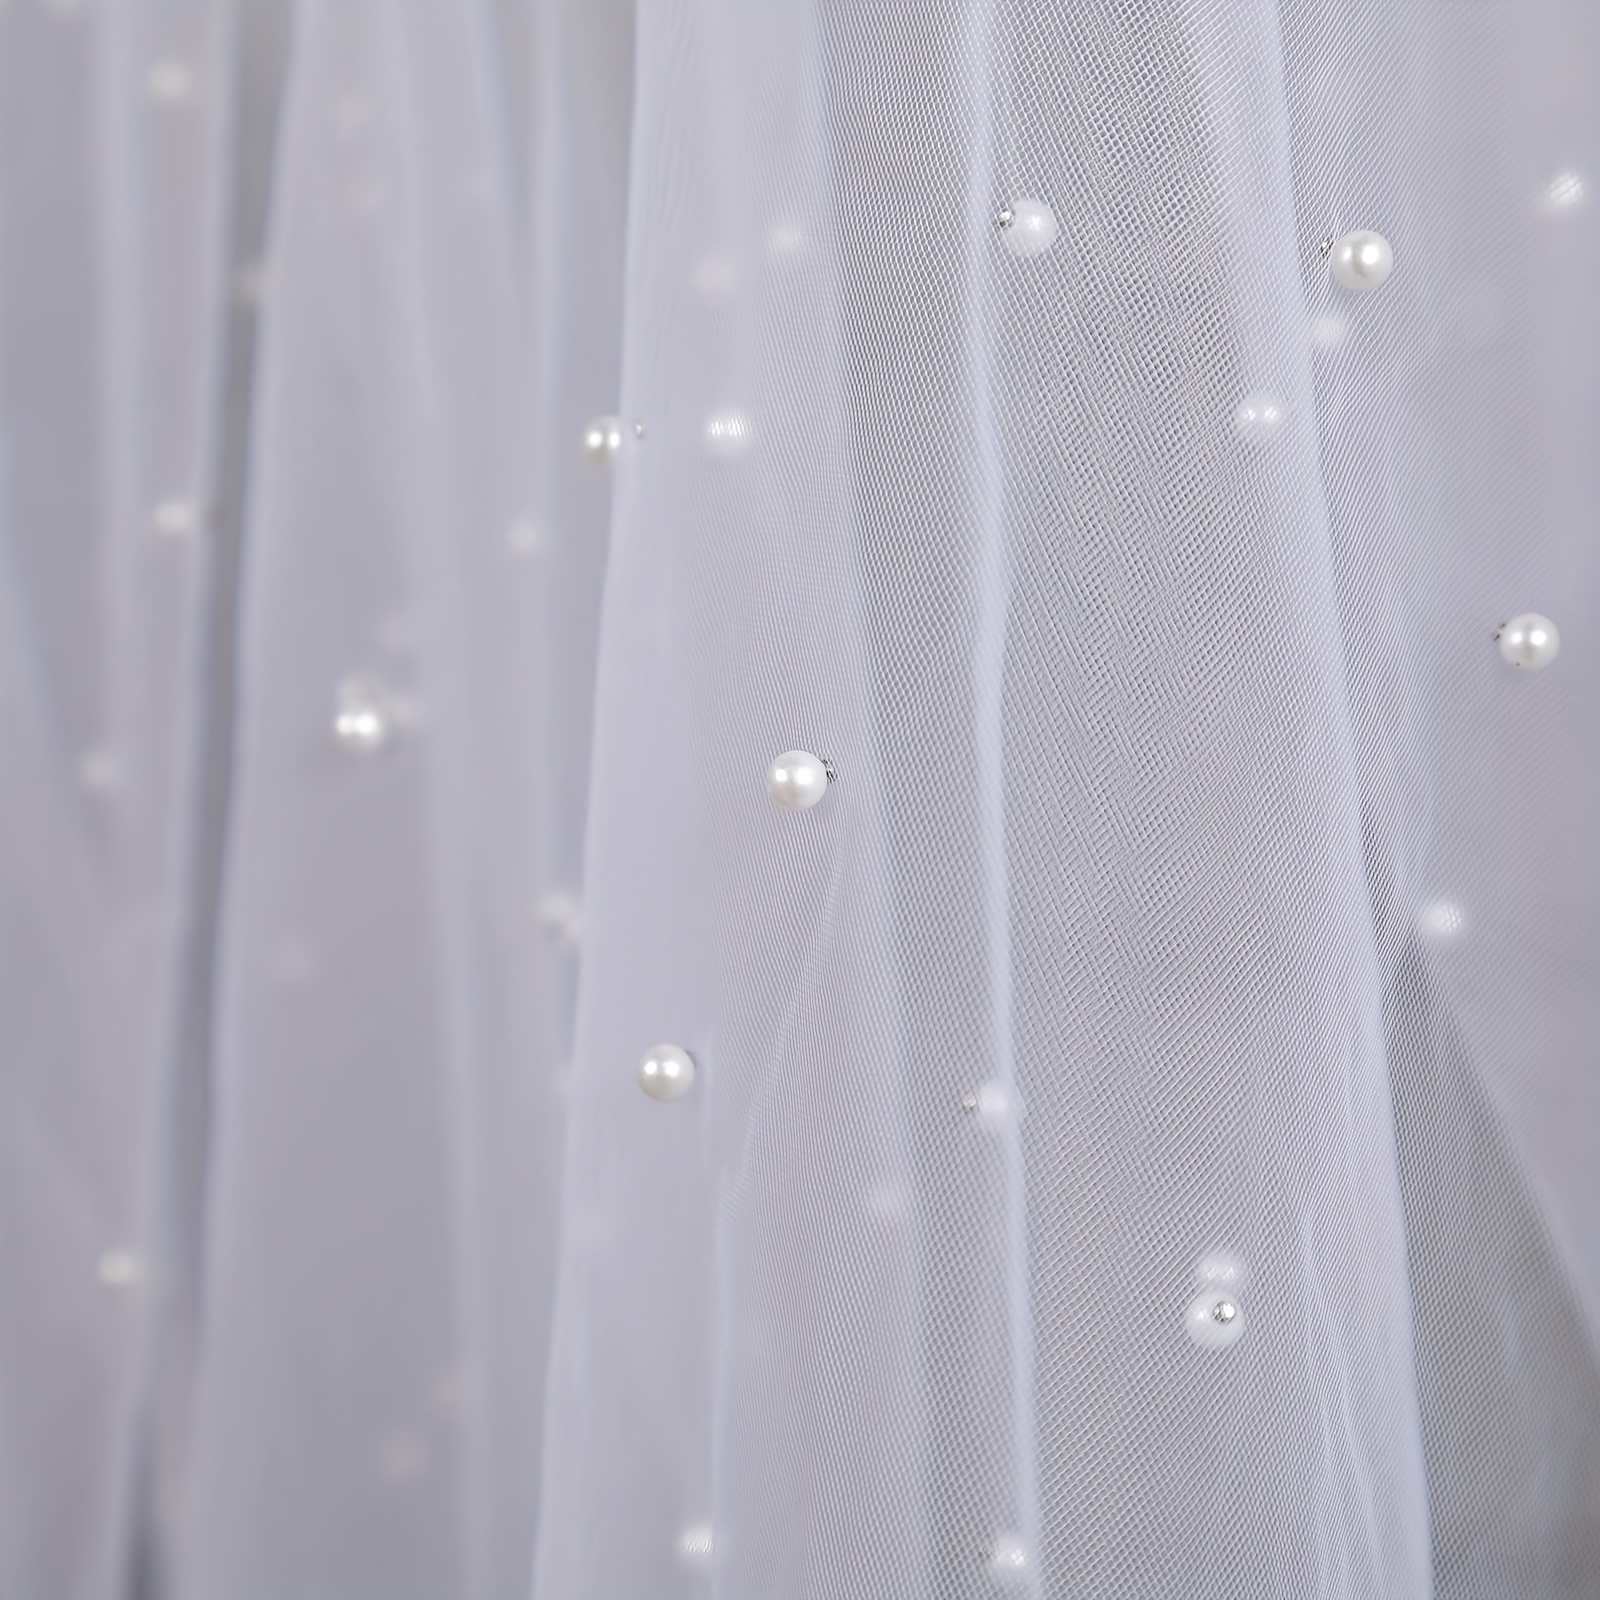 Very Soft Tulle with Pearls, Tulle with Beads, 52 Wide